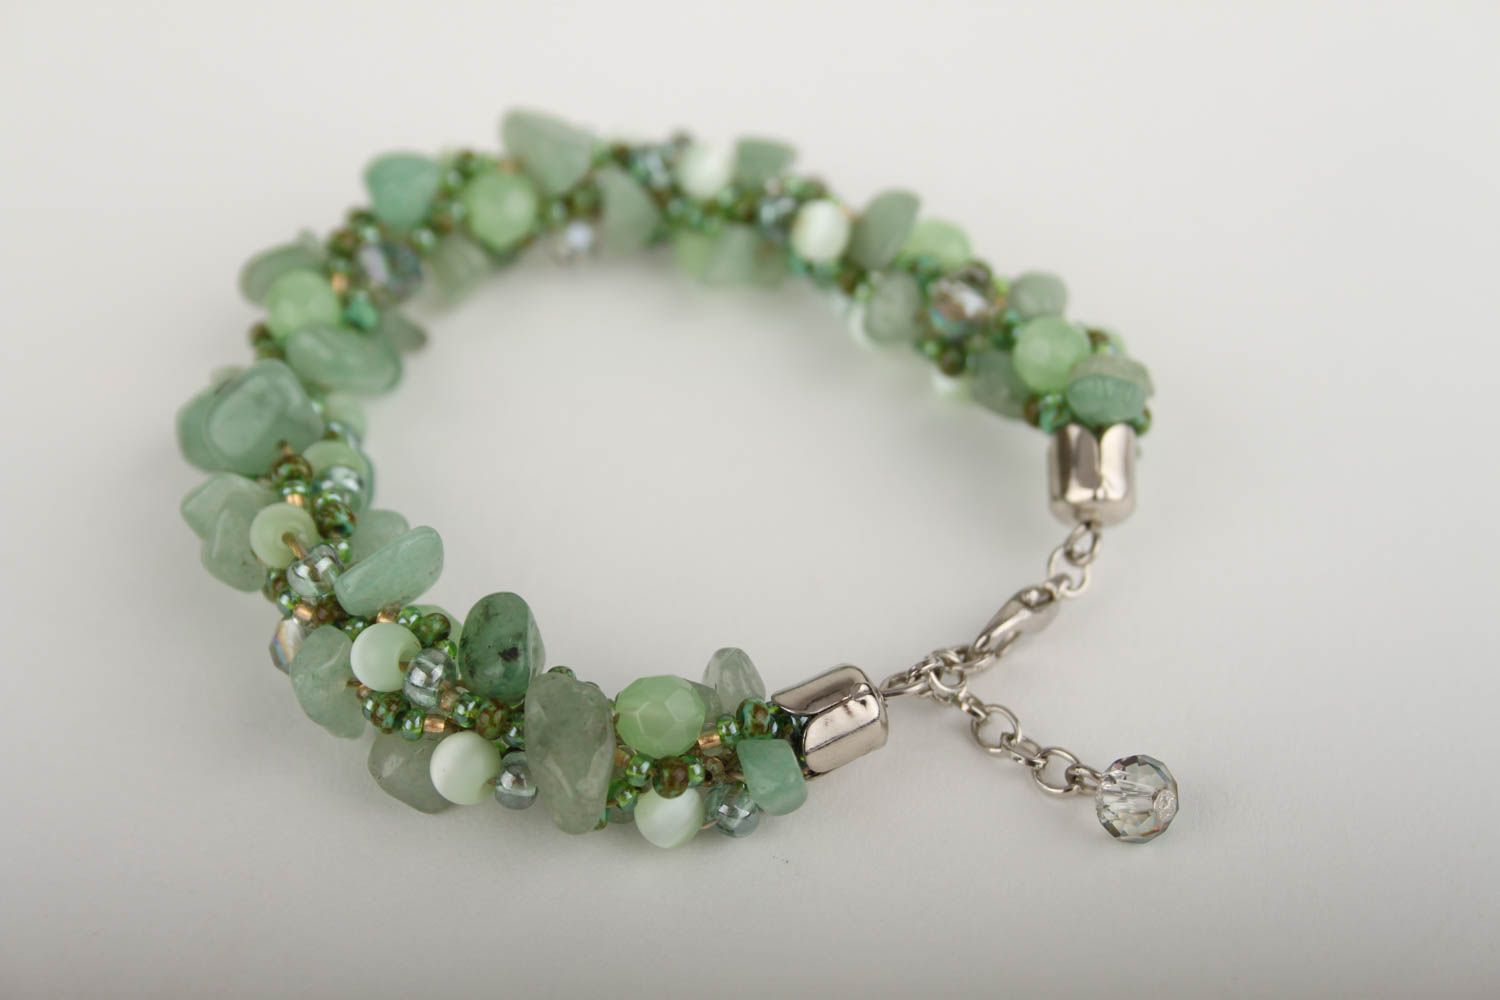 Handmade bracelet with natural stones nephritis bracelet fashion jewelry for her photo 3